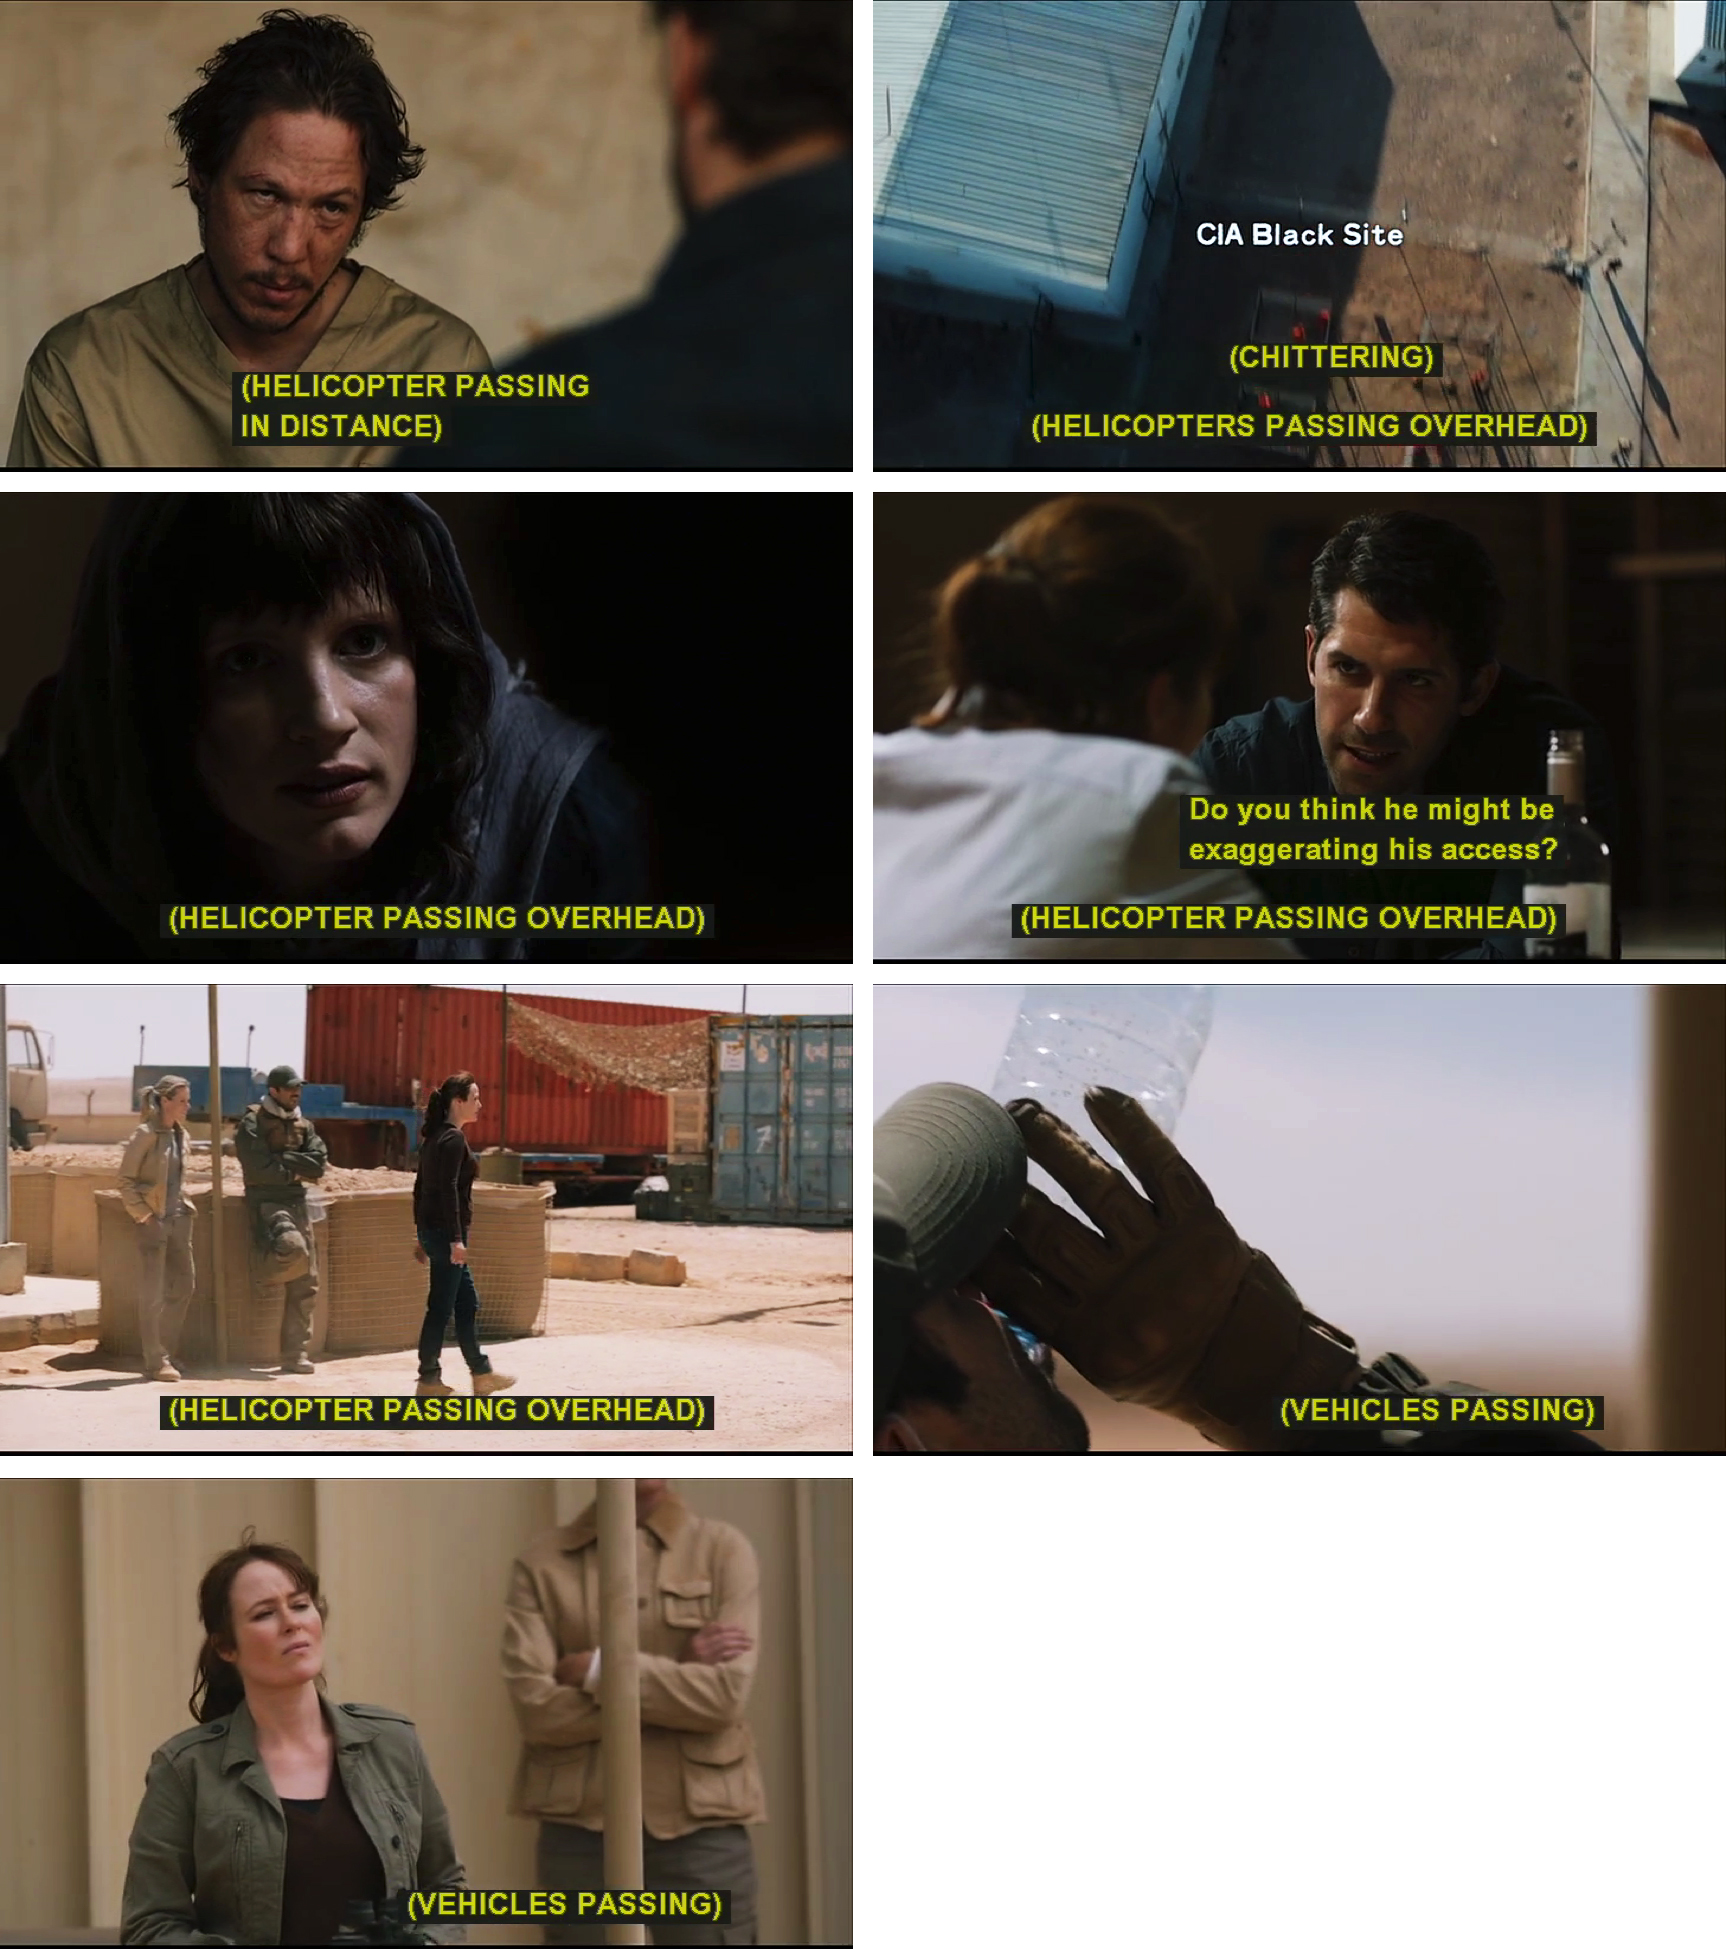 A compliation of frame grabs from Zero Dark Thirty featuring seven nonspeech "passing" captions.